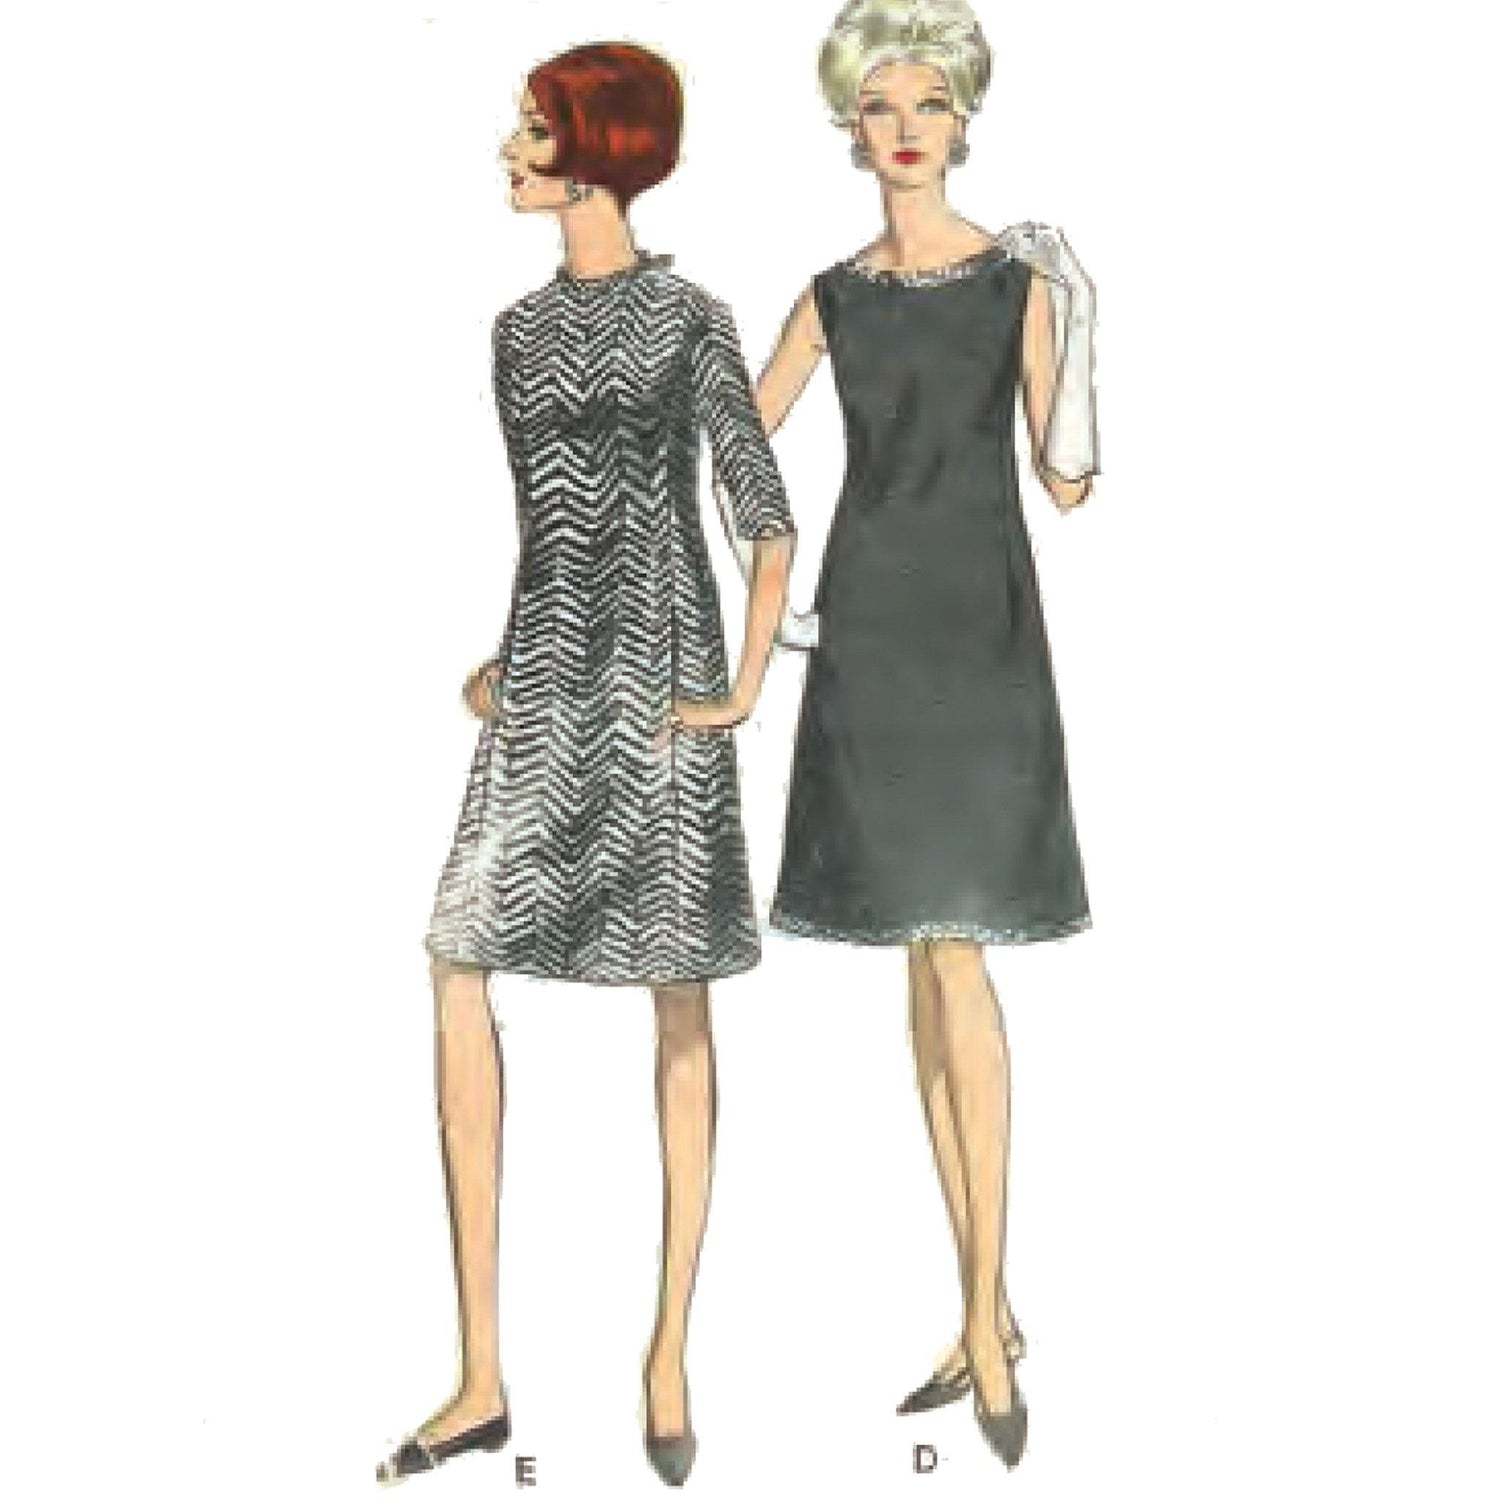 2 women wearing A-Line Mod style dresses. Left to right: Style E: Elbow length sleeves, black and white chevron pattern. Style D: Sleeveless, black.